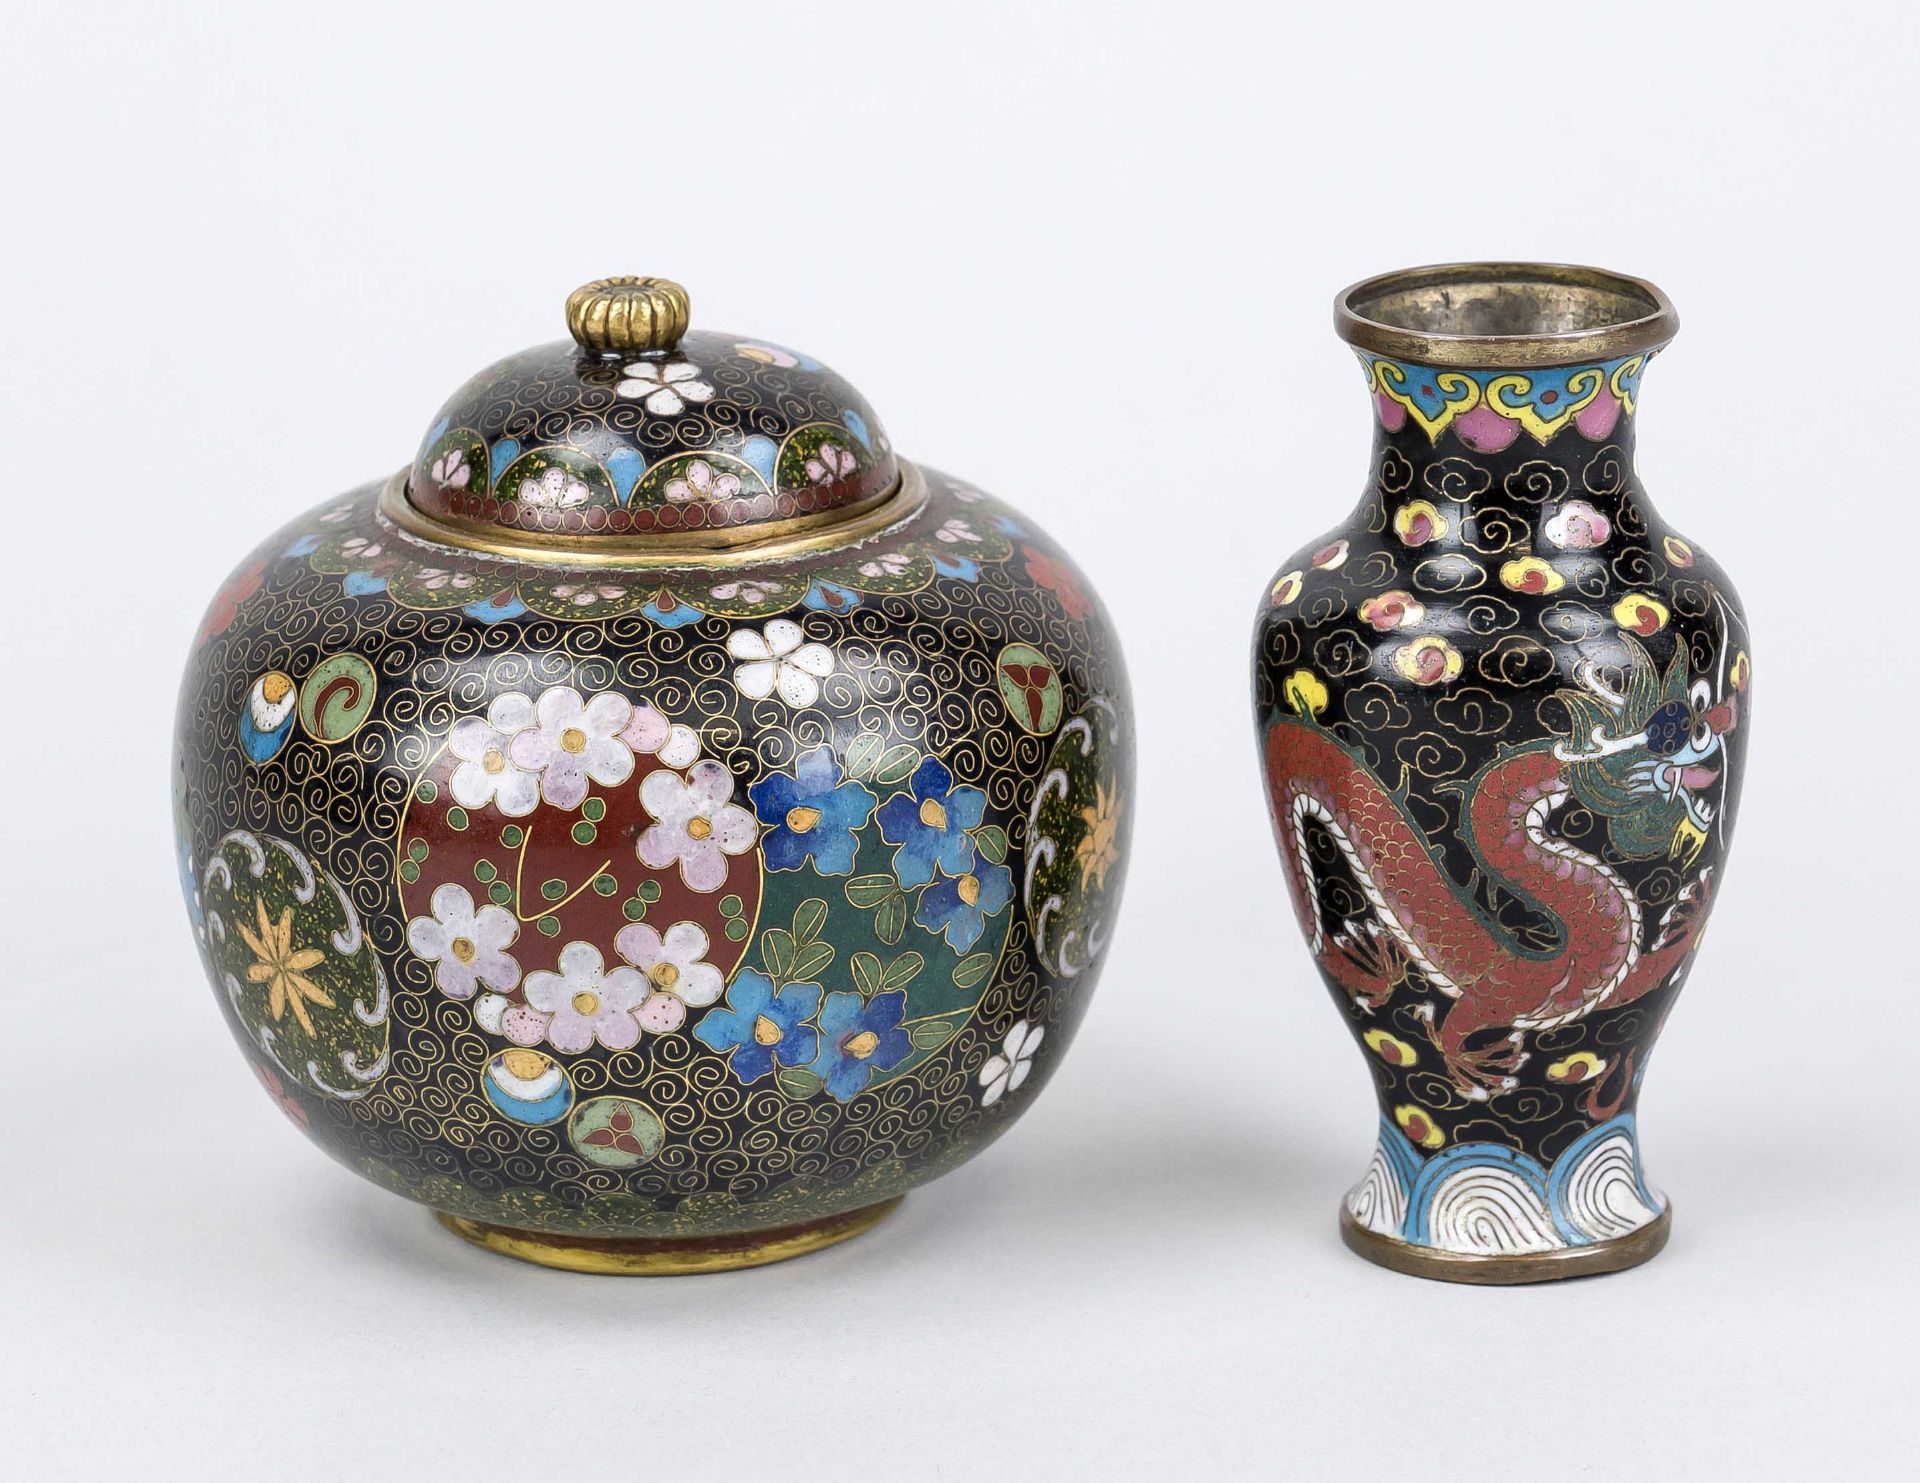 Cloisonné lidded box and vase, Japan, c. 1900, both with polychrome decoration of dragons and floral